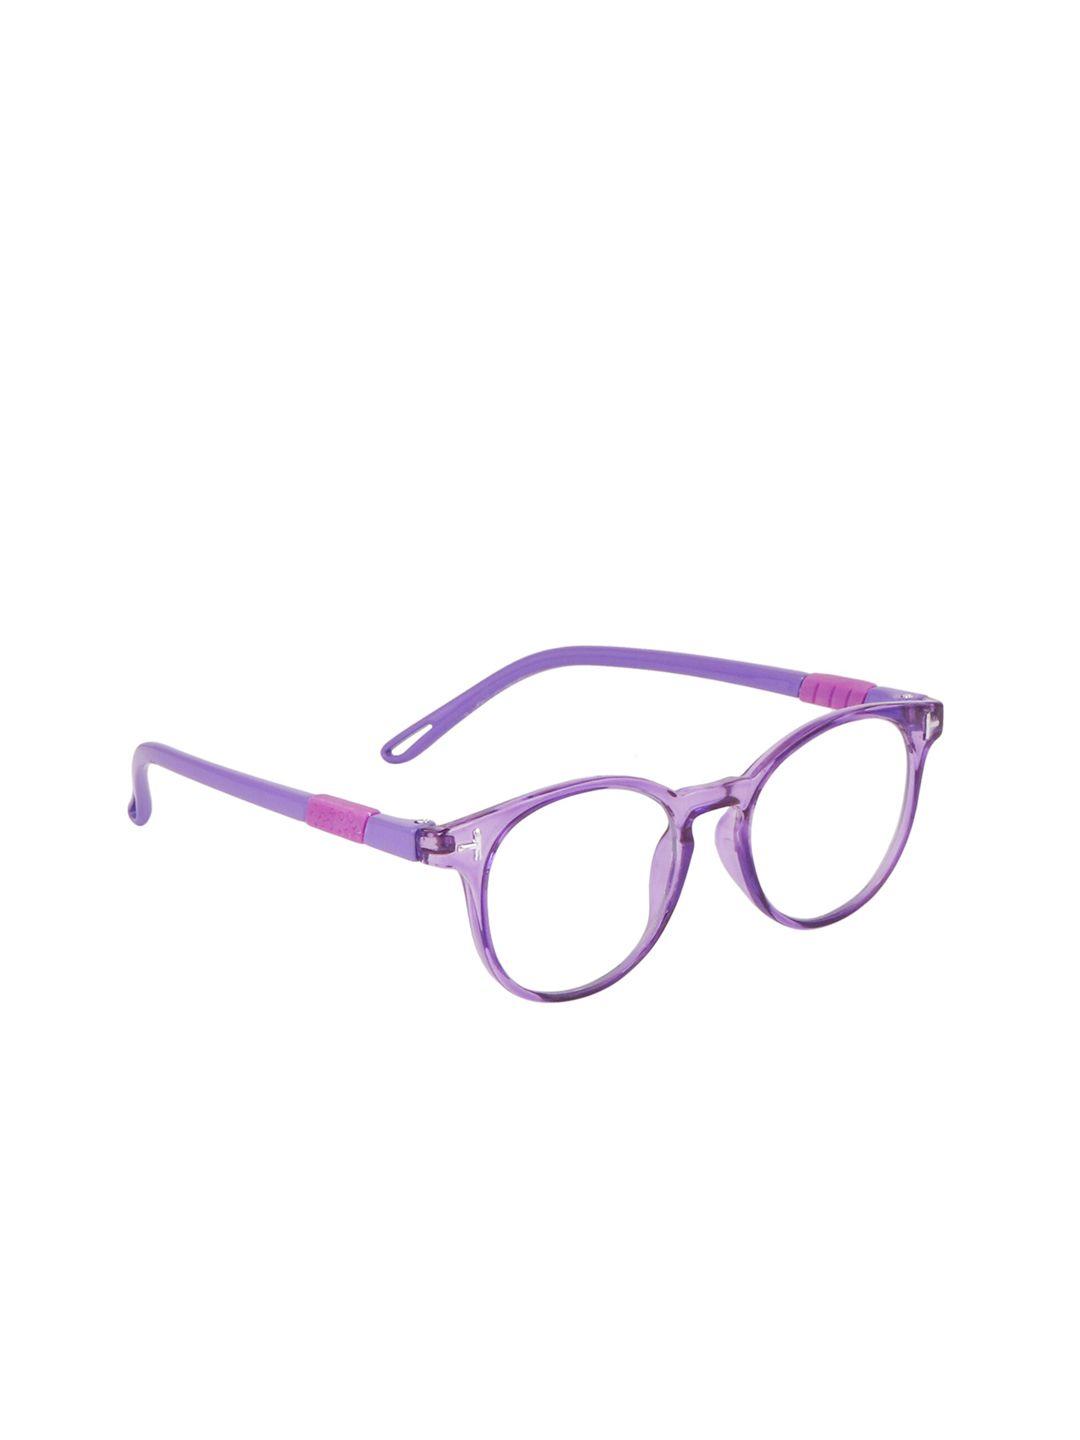 optify unisex clear lens & purple round sunglasses with uv protected lens